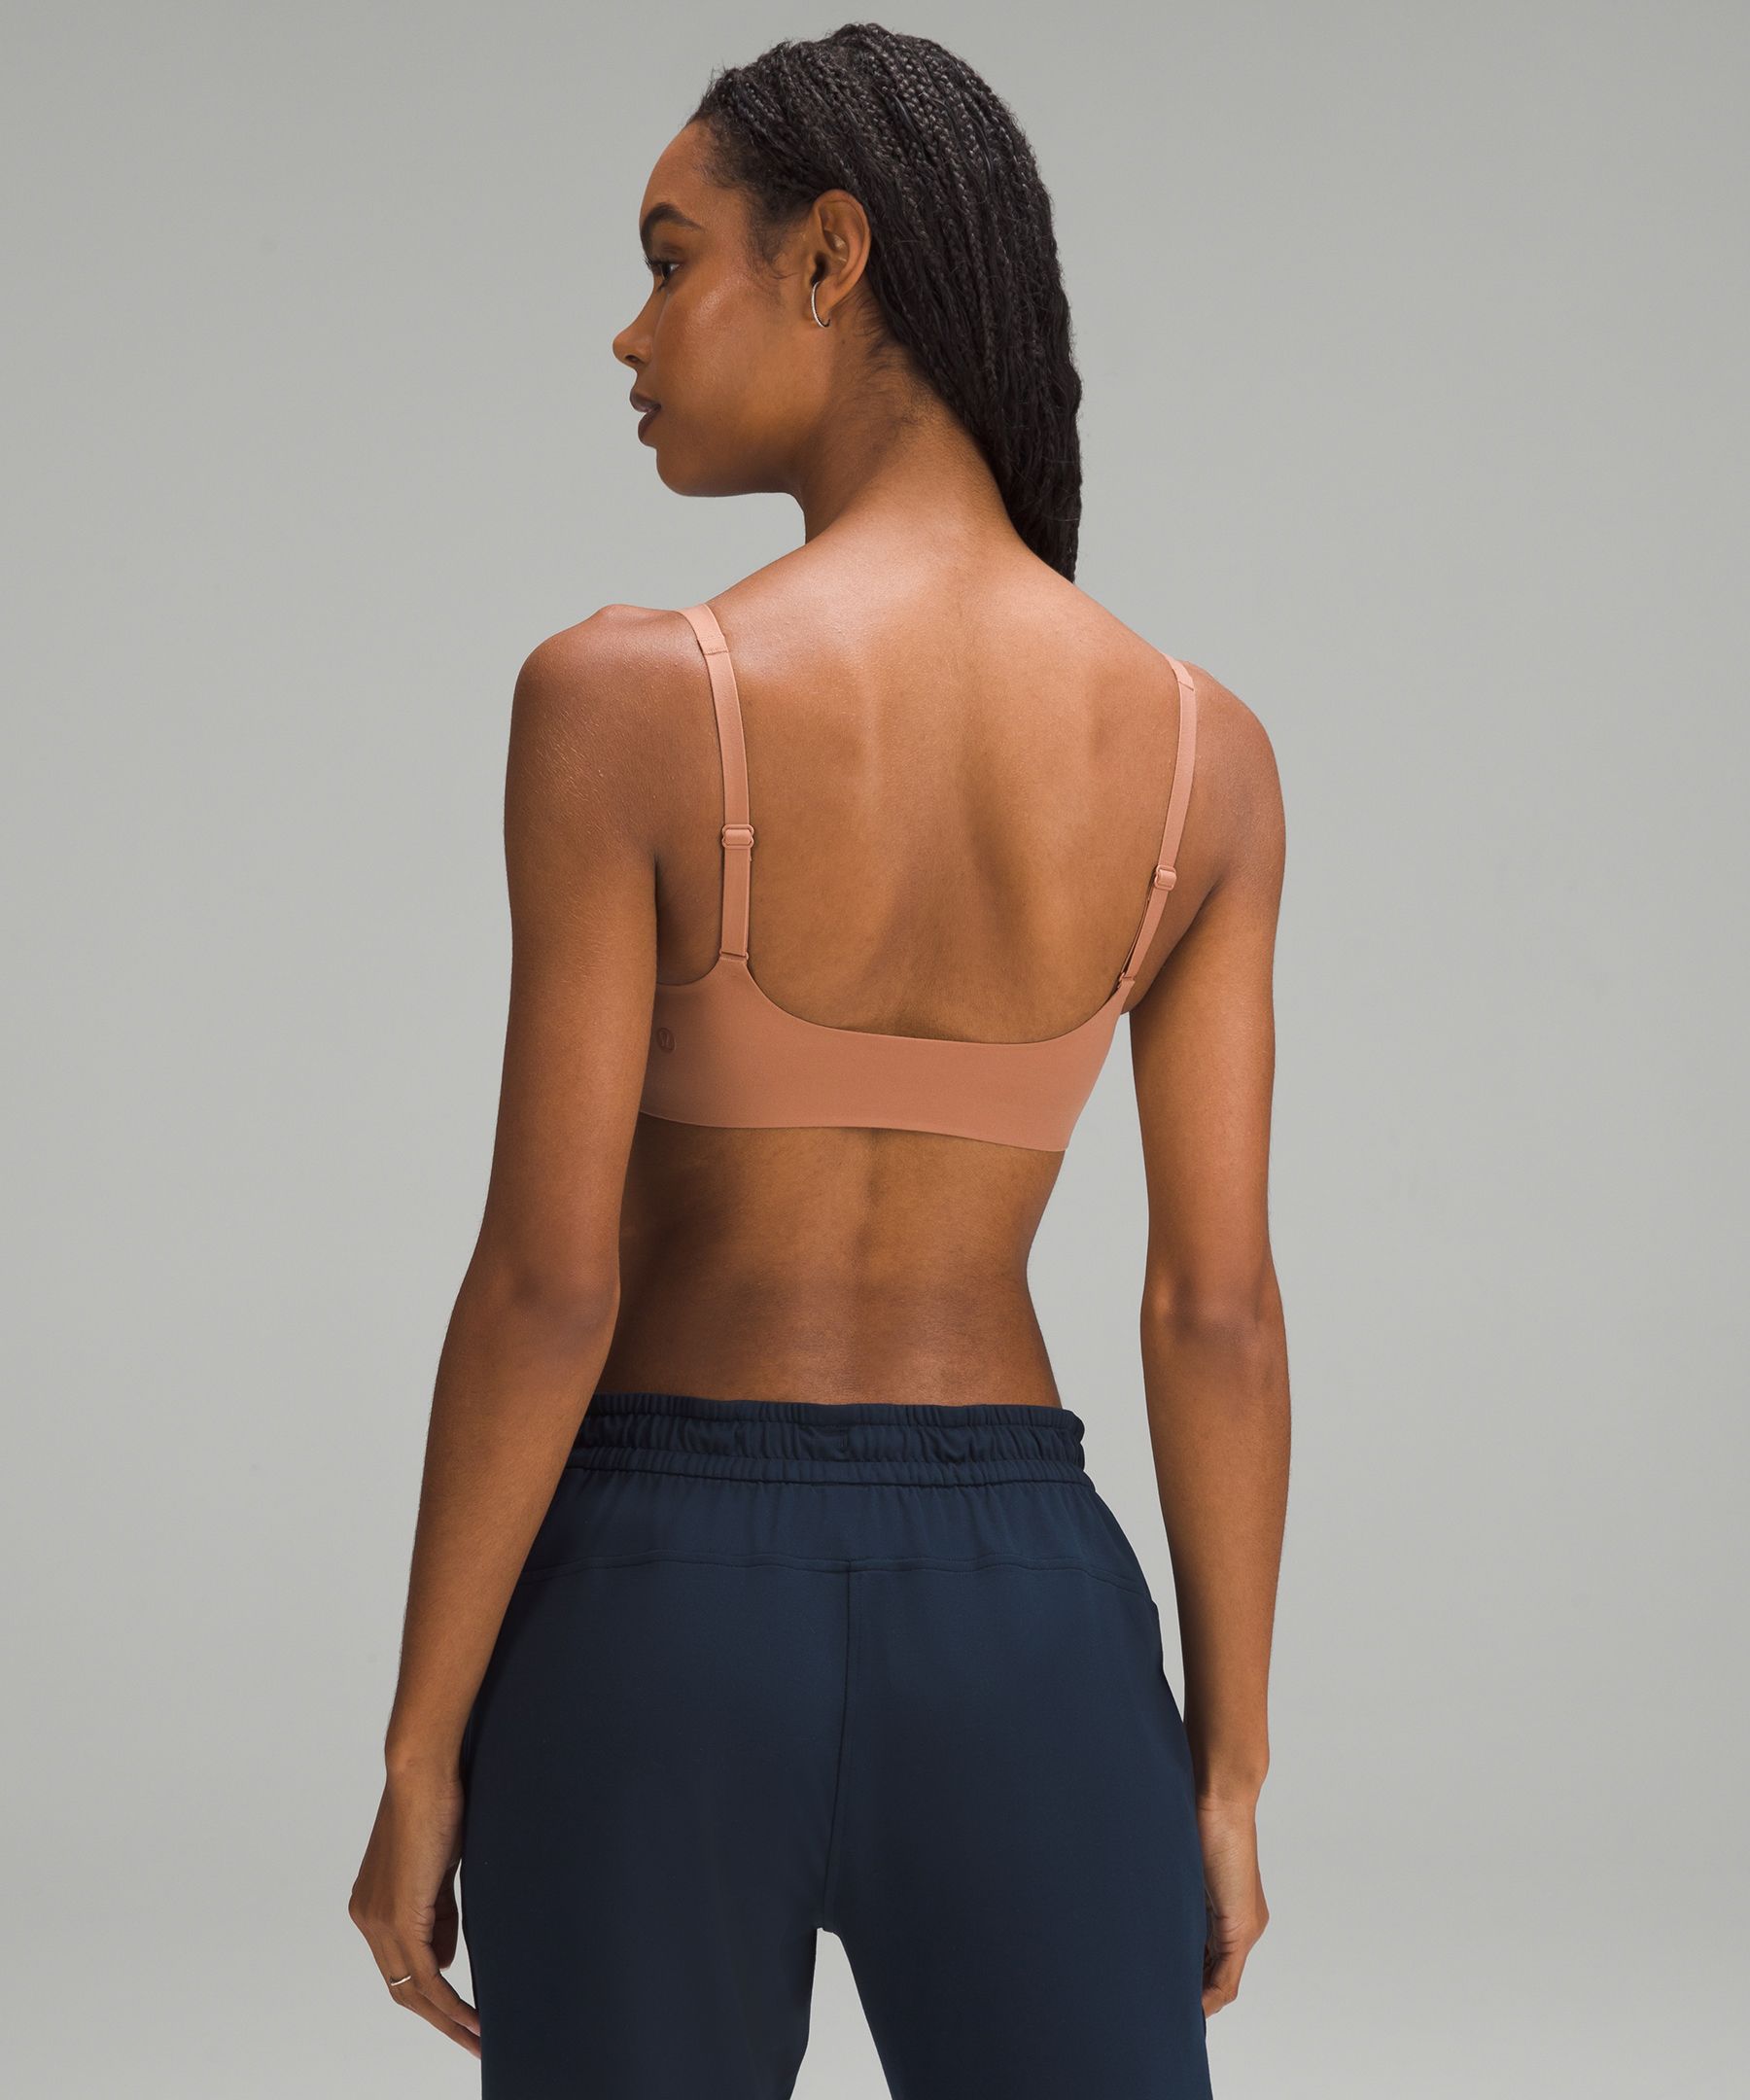 This $39 Lululemon bra is so comfy, it feels like you 'aren't